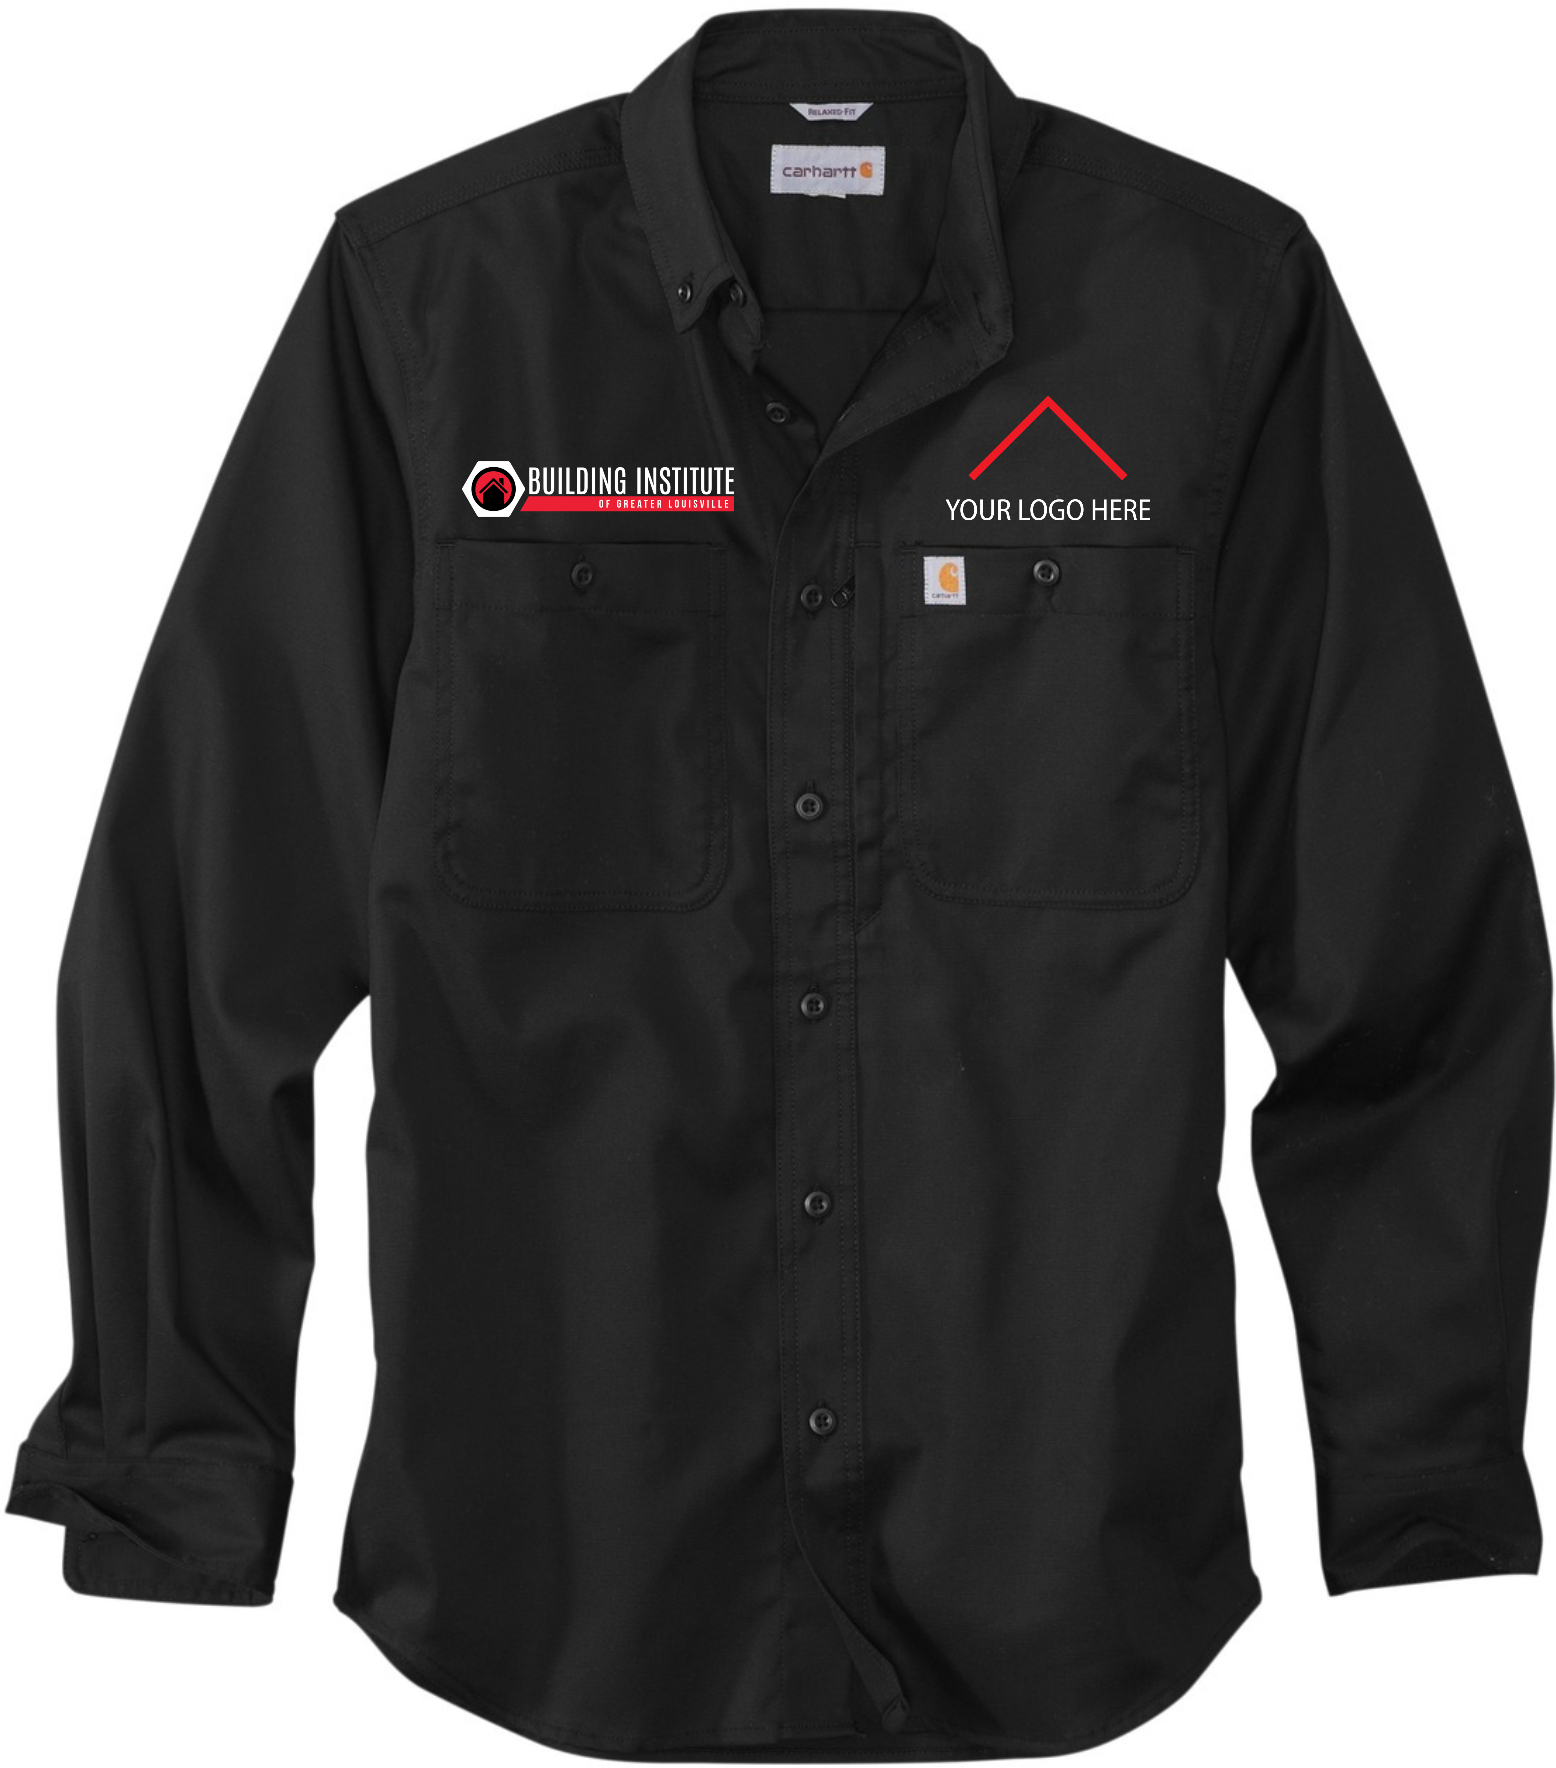 Building Institute – Carhartt® Rugged Professional™ Series Long Sleeve Shirt (White Logo) (Add Your Own)